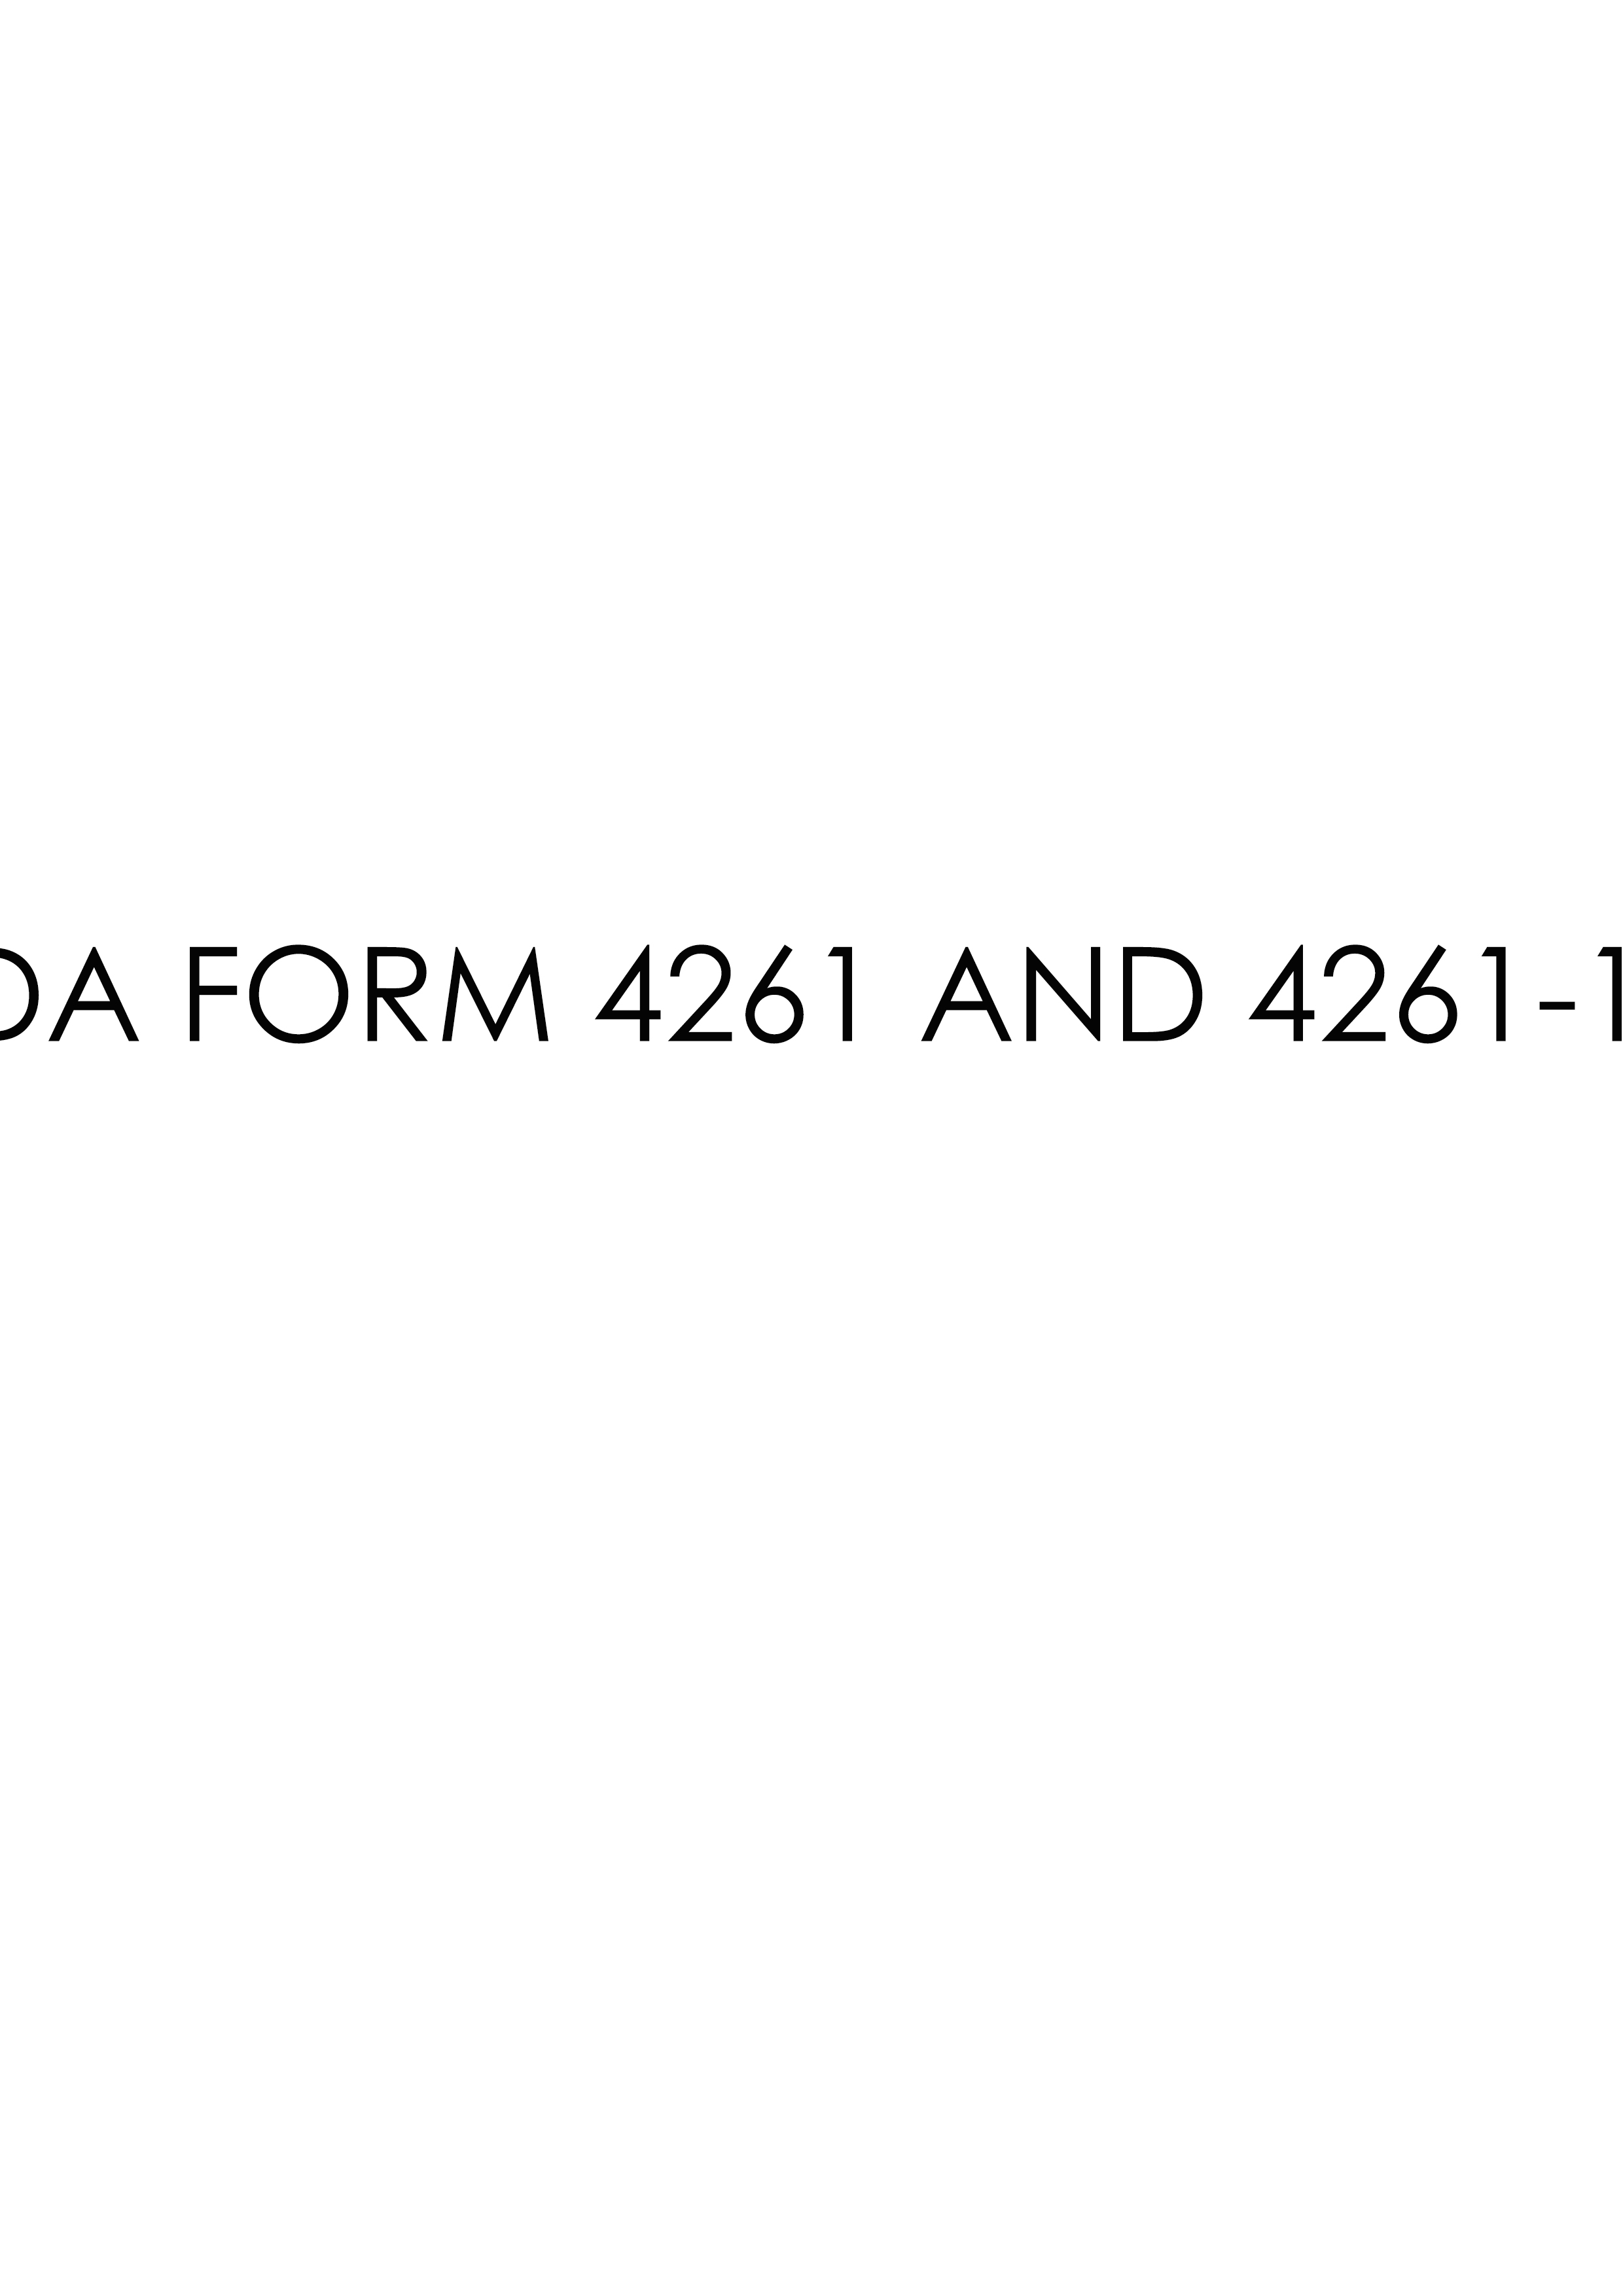 da Form 4261 AND 4261-1 fillable